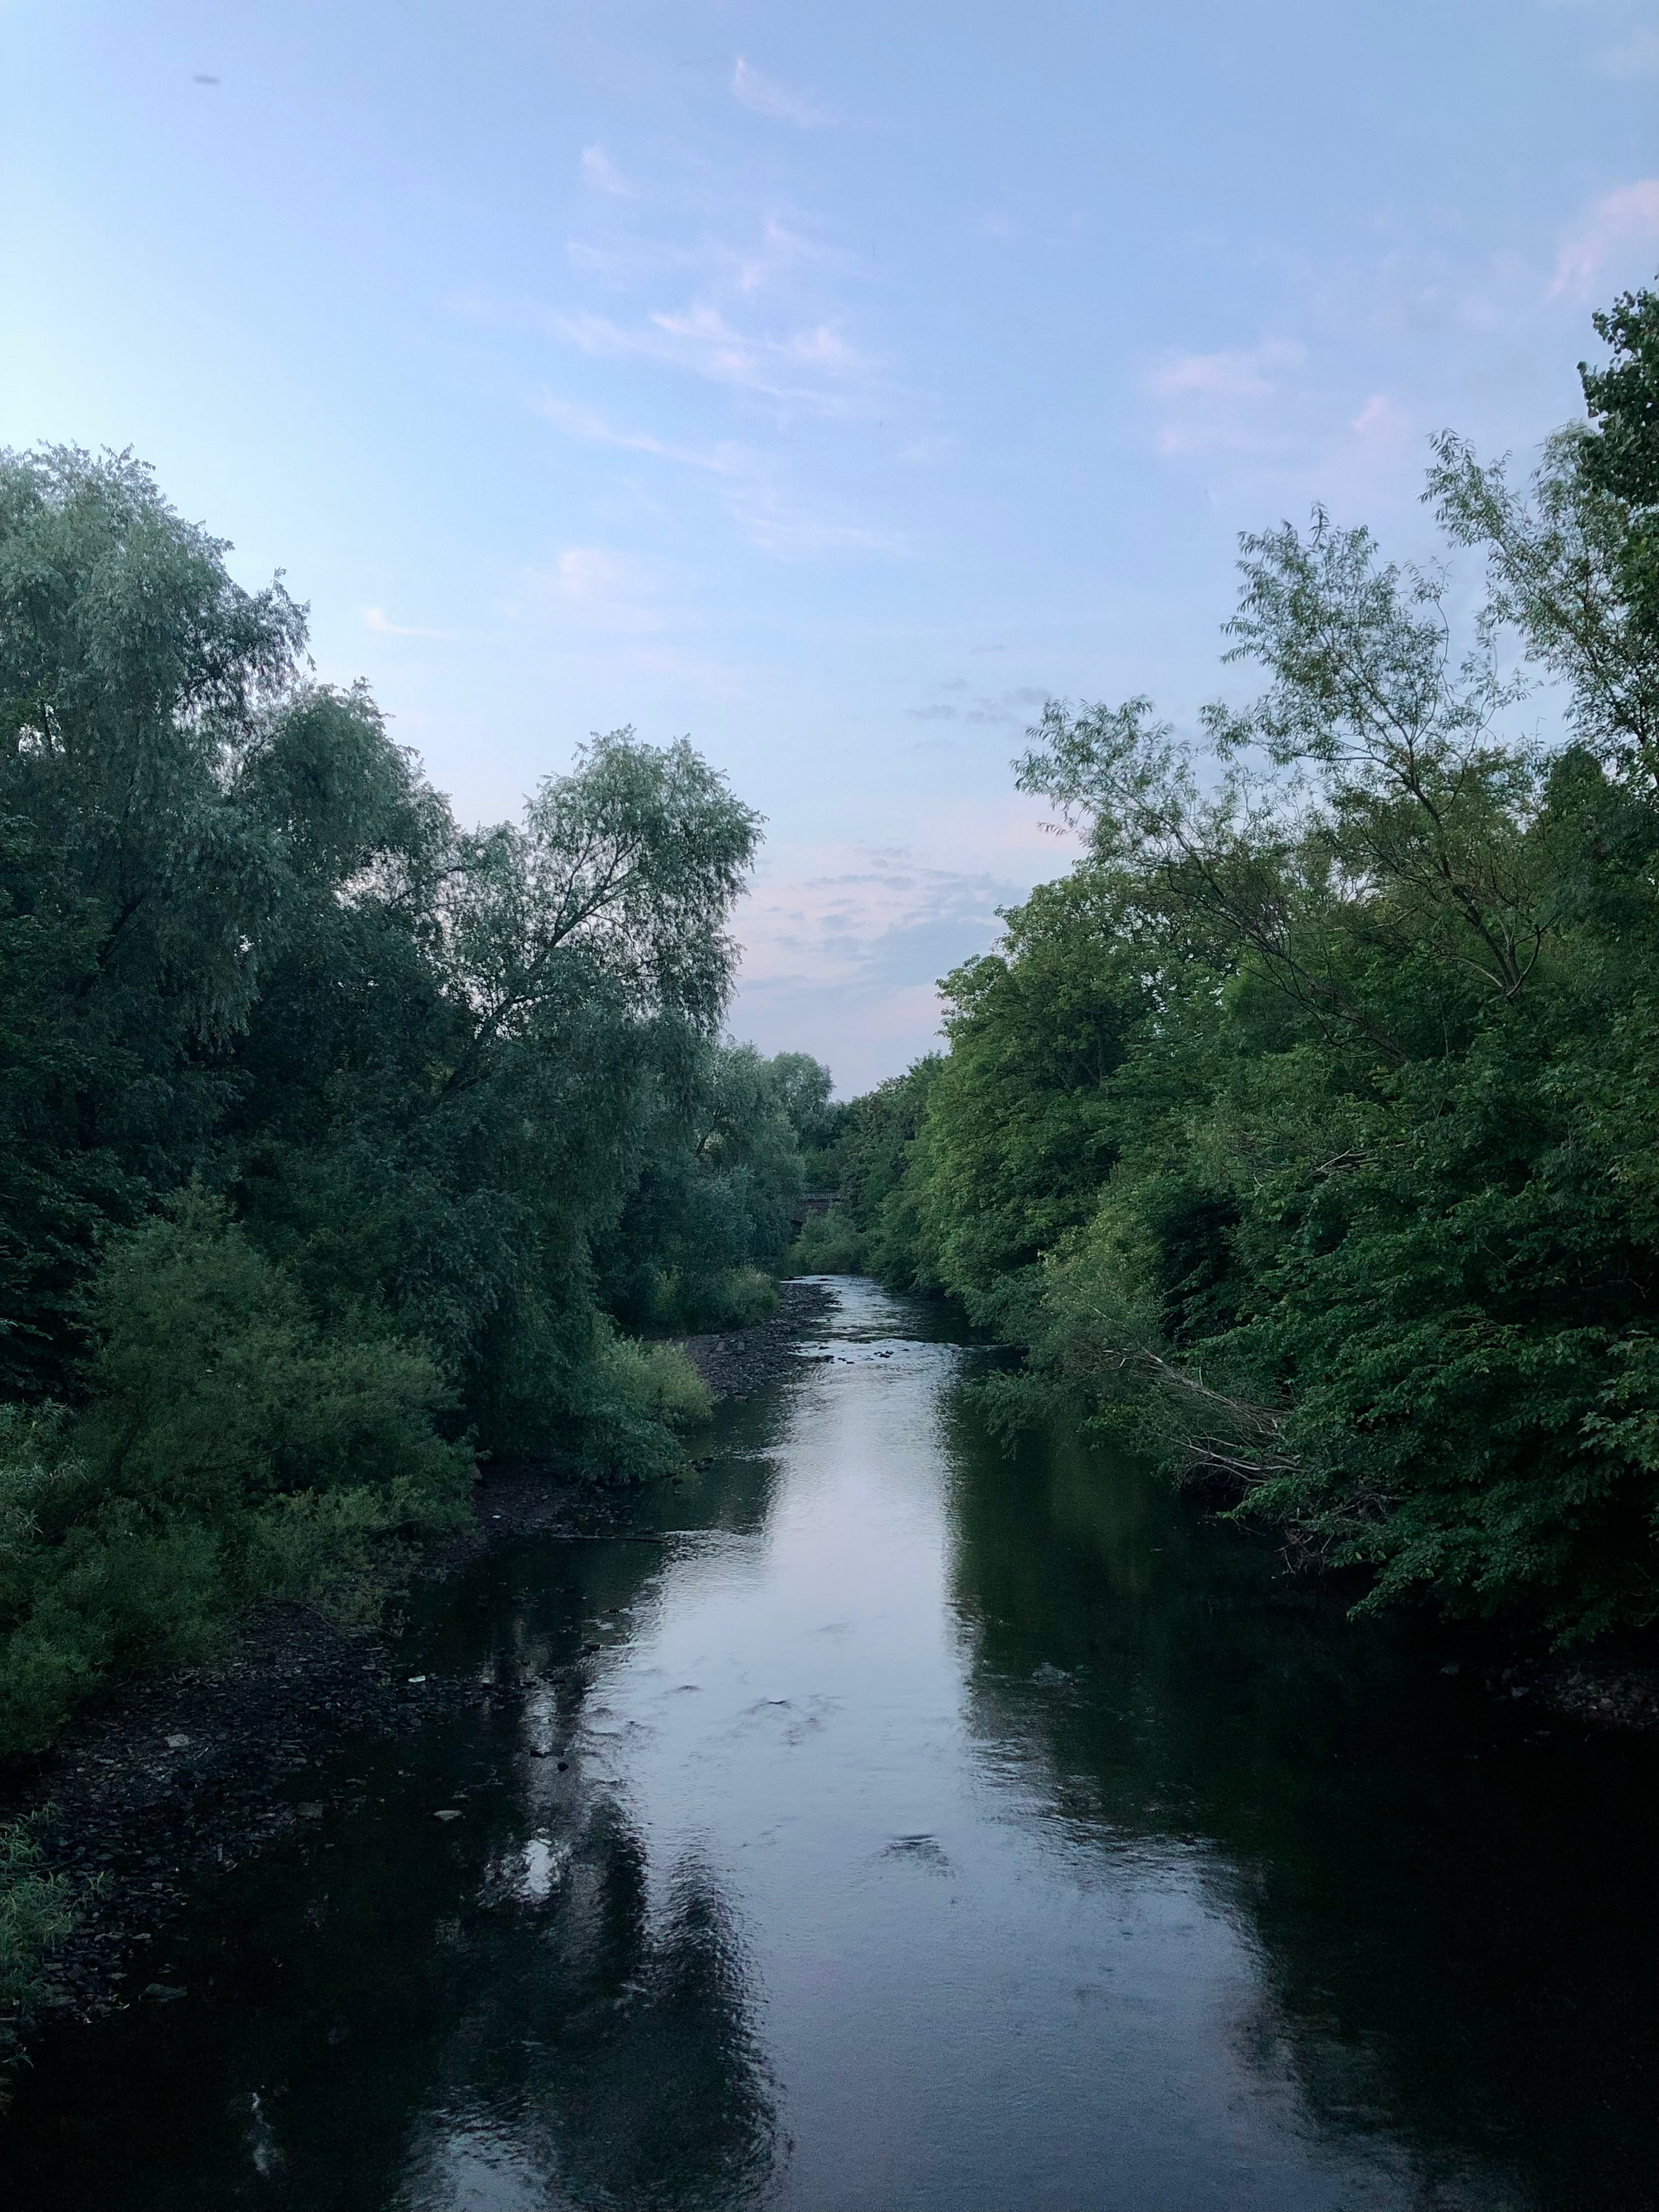 The river Kelvin in a lavender dusk, flanked by green trees on both sides.